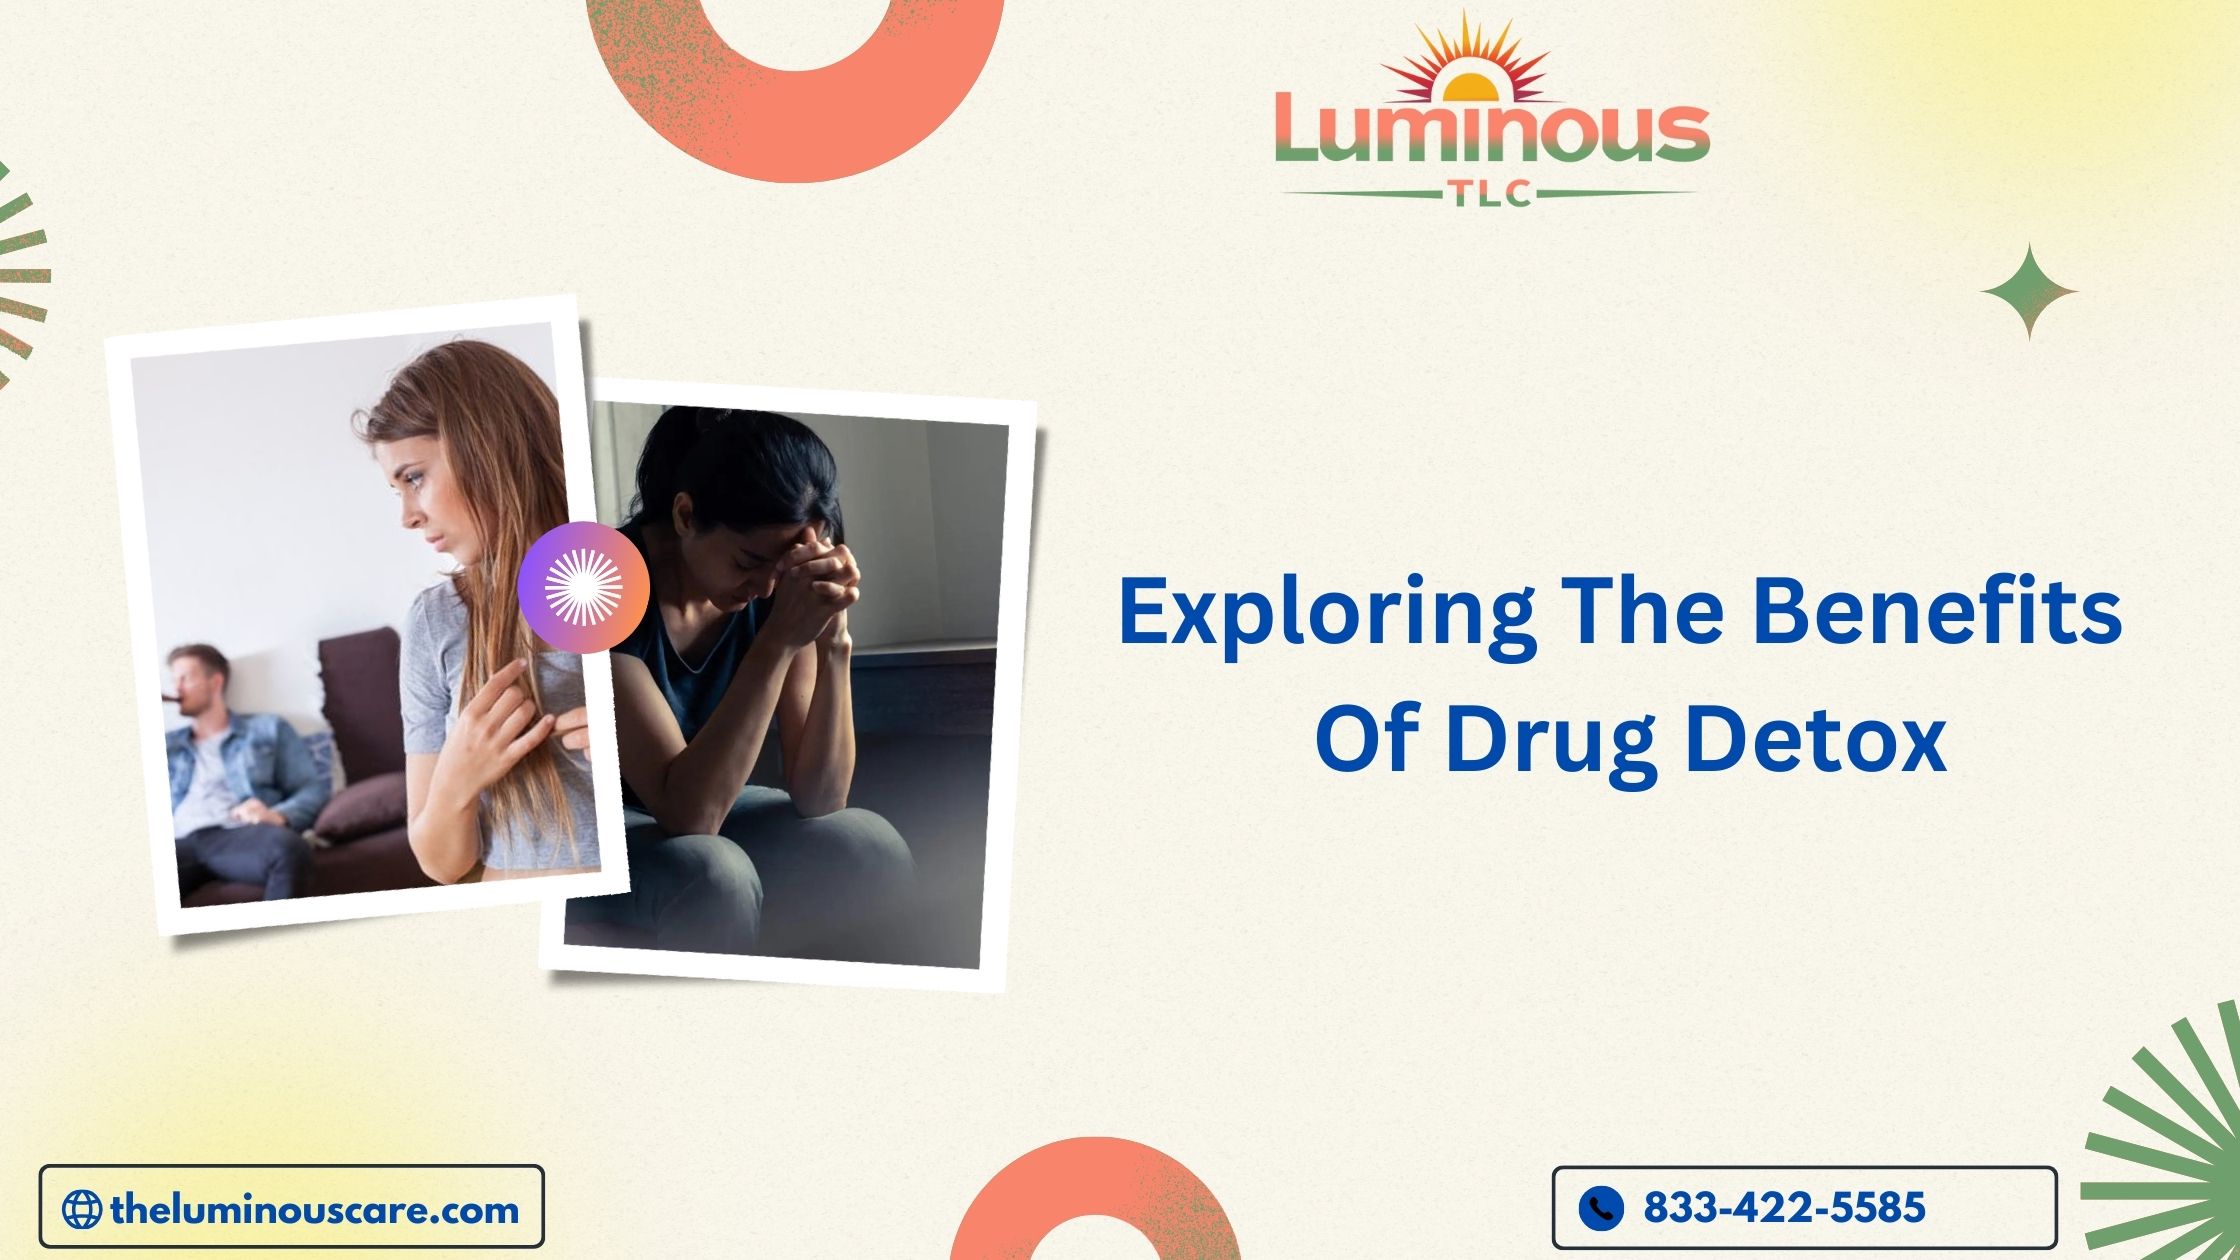 Exploring The Benefits Of Drug Detox In New York By The Luminous Care